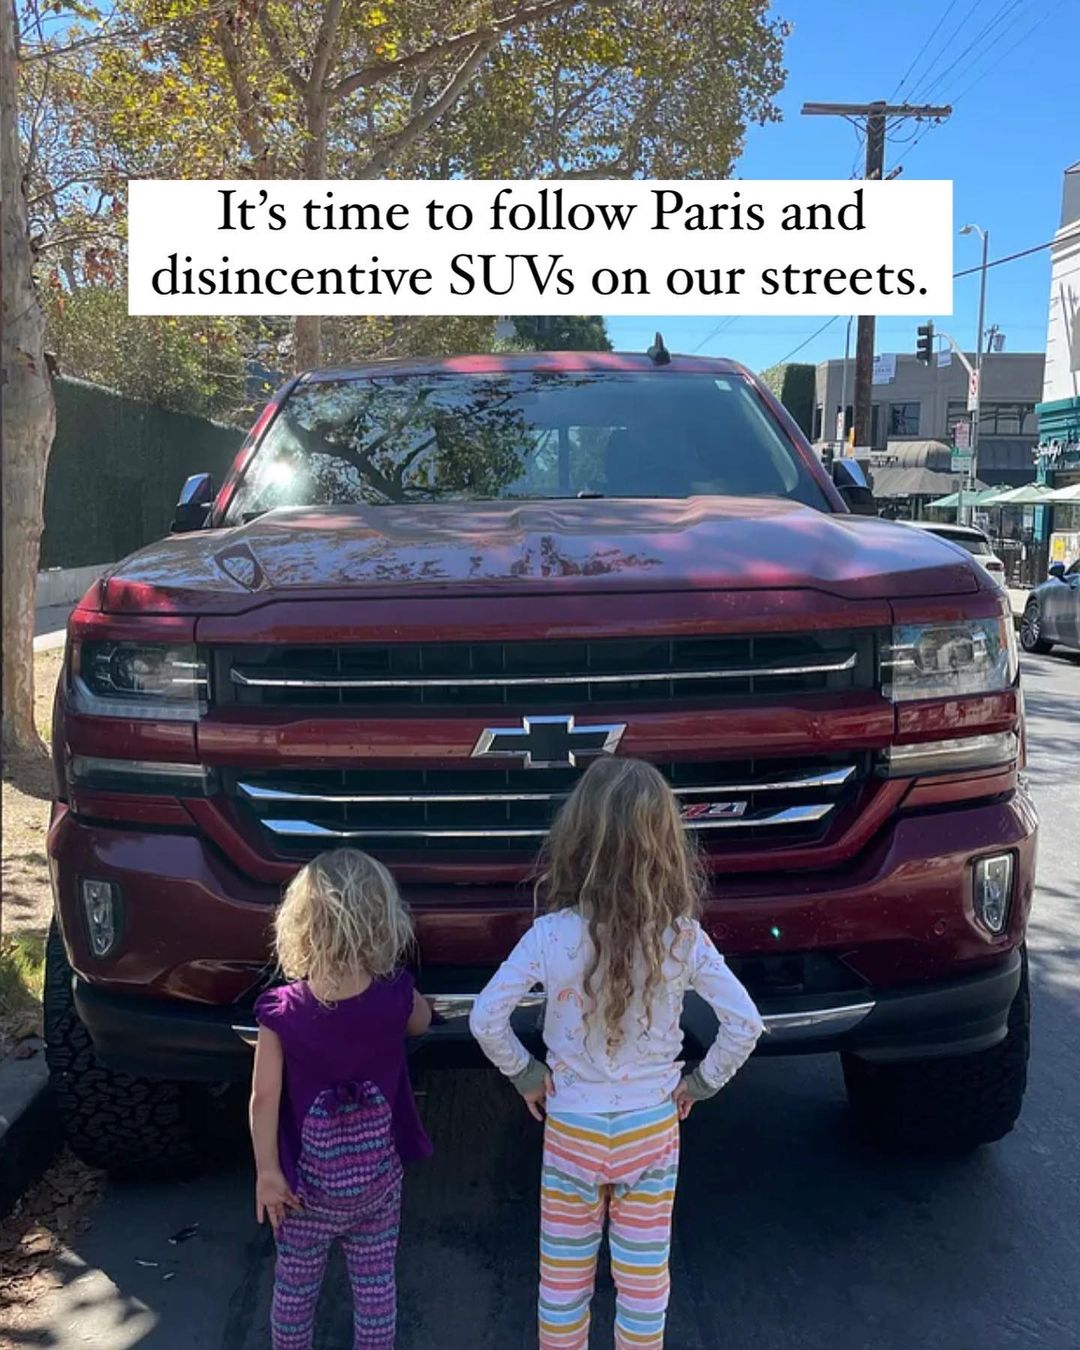 'It's time to follw Paris and disincentive SUVs on our streets' Credit: Cr Sophie Wade, Instagram